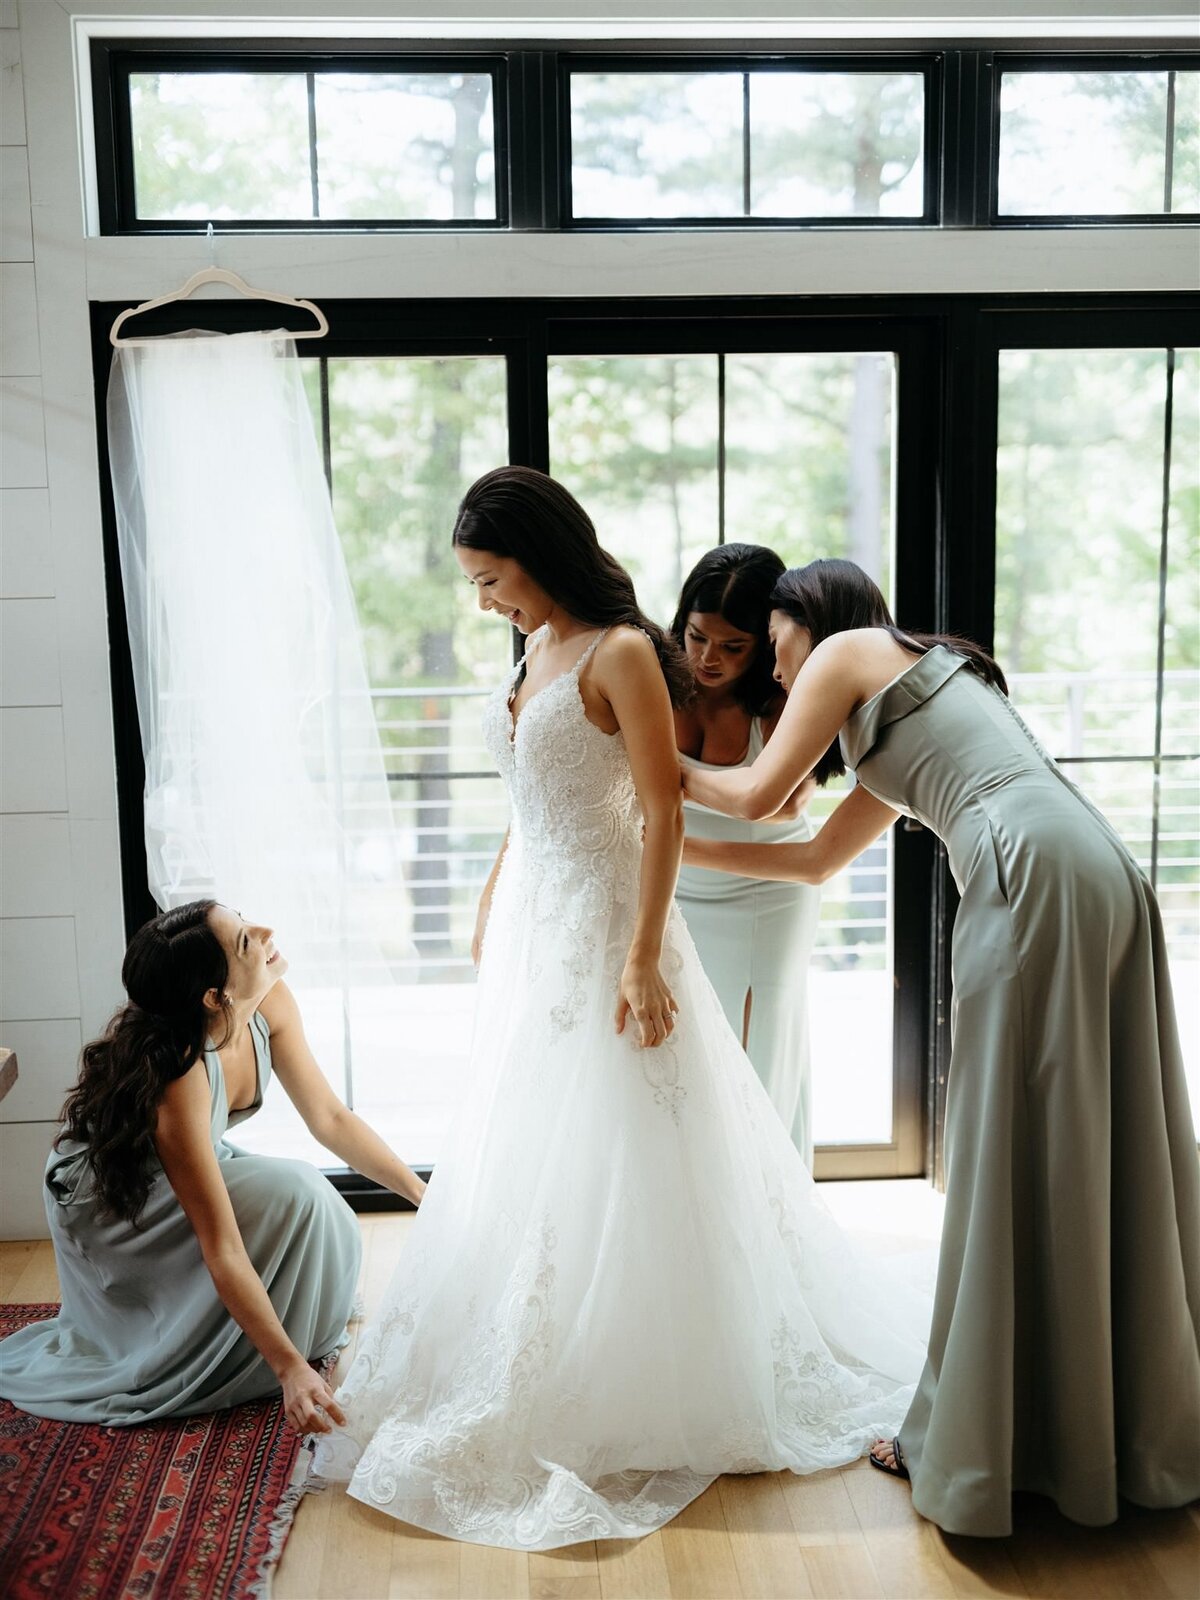 Three bridesmaids in floor-length sage green dresses help bride button and fluff her dress in the modern bridal suite with lots of windows, overlooking wooded area.